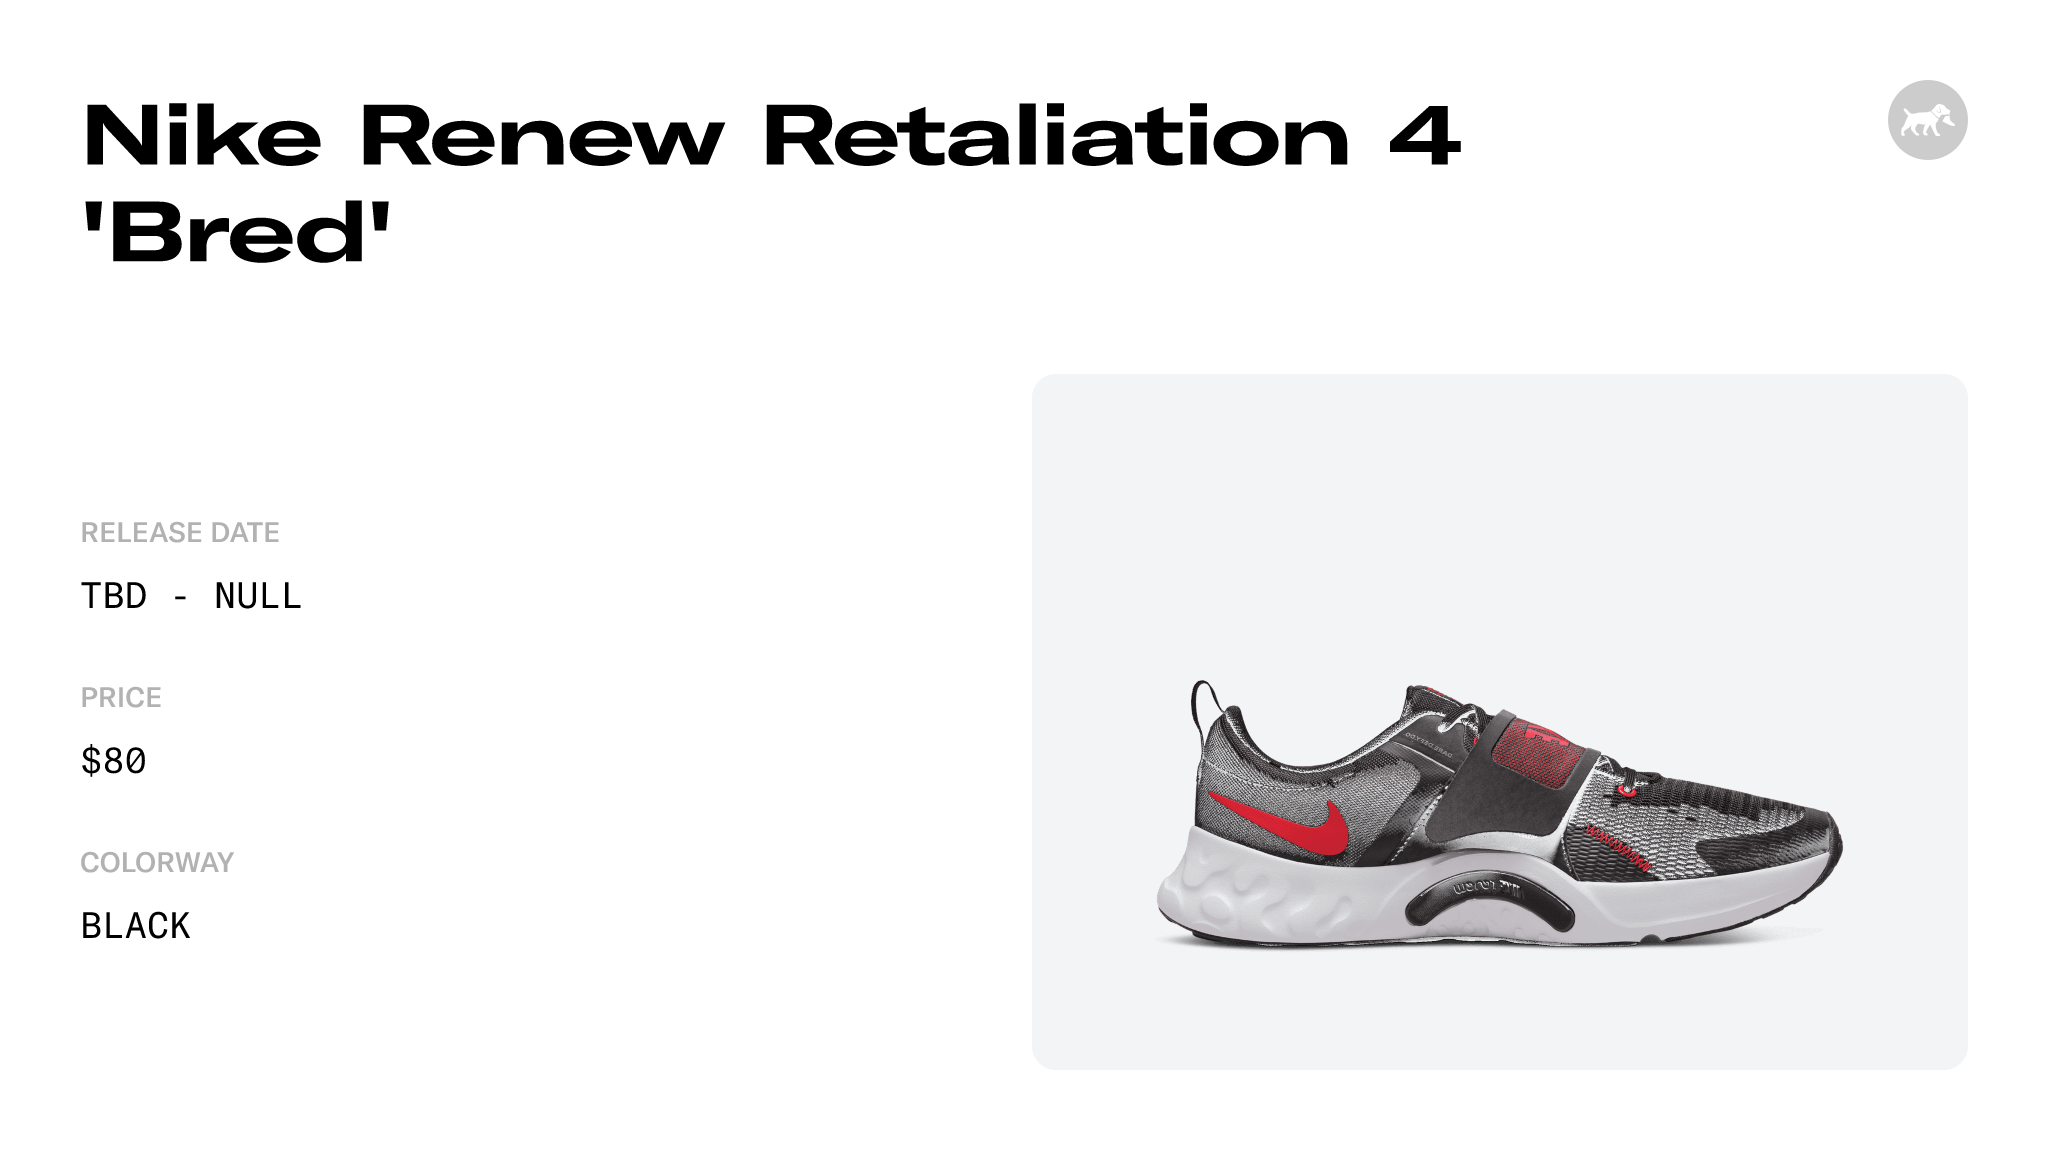 Nike Renew Retaliation 4 'Bred' - DH0606-002 Raffles and Release Date